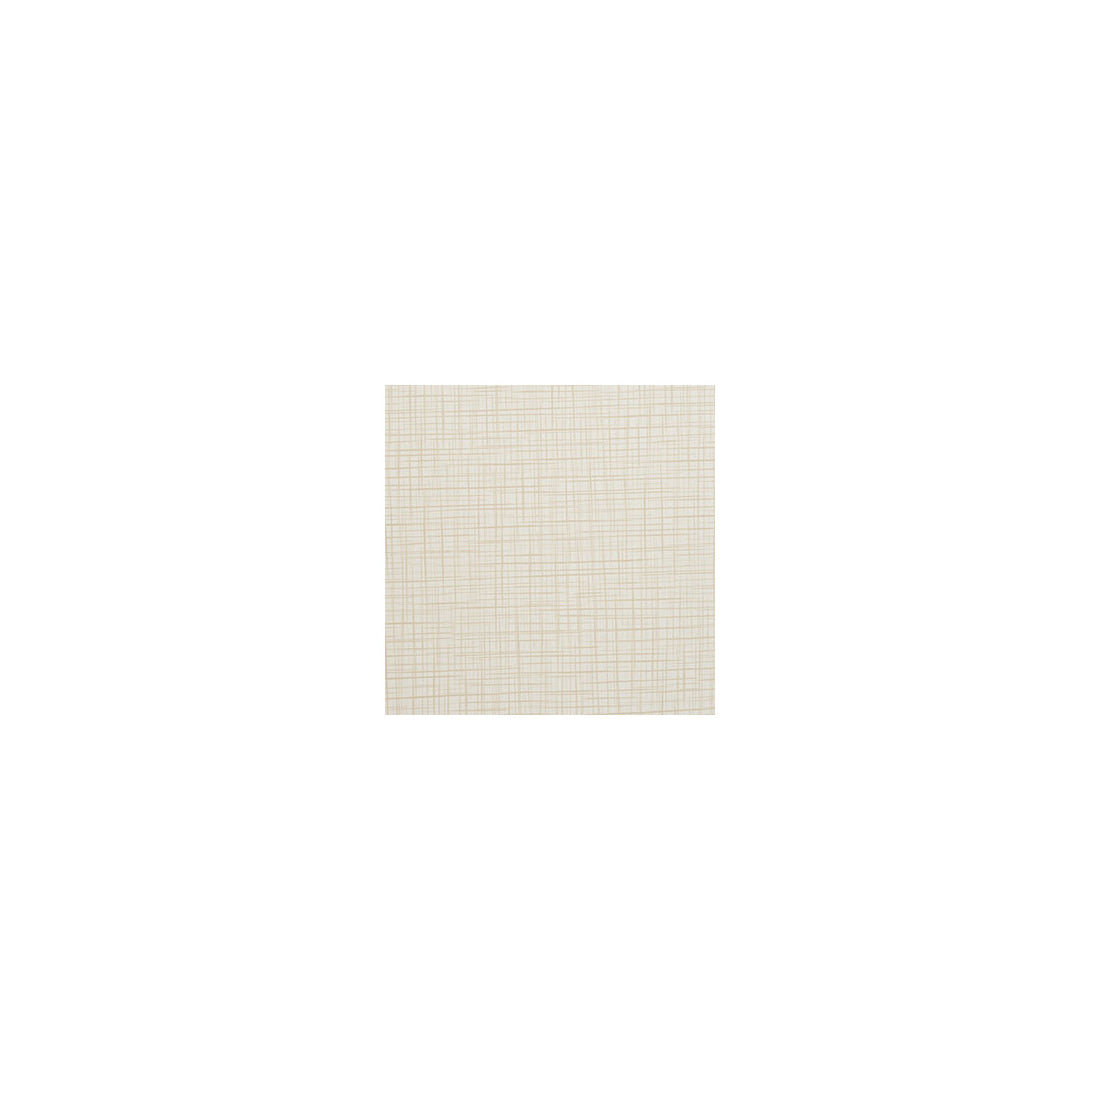 Chord fabric in birch color - pattern CHORD.1.0 - by Kravet Contract in the Sta-Kleen collection